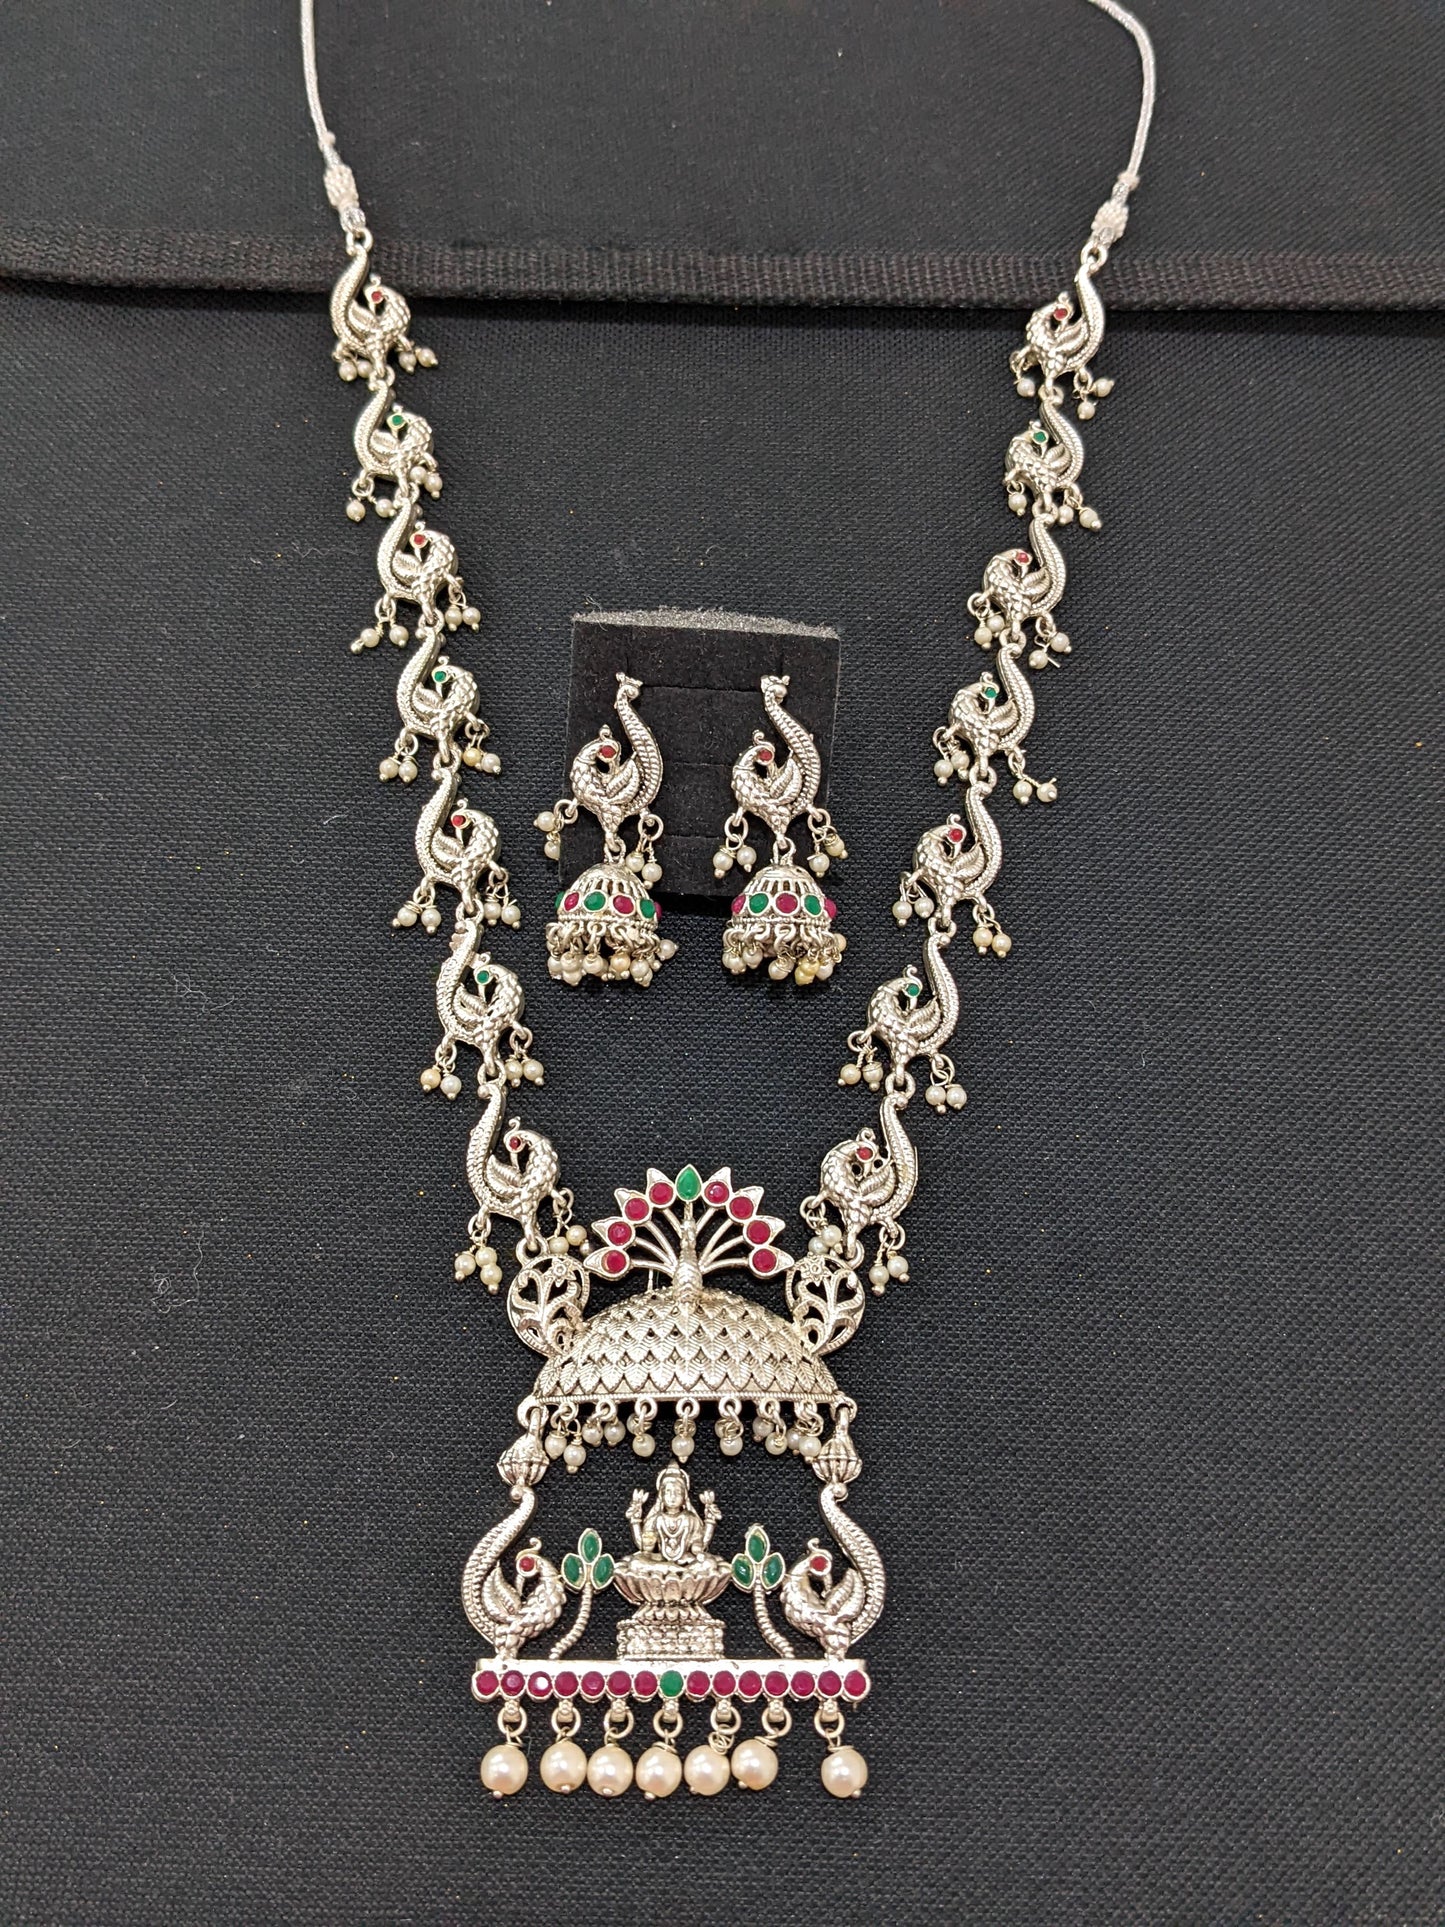 Bright rhodium silver plated Peacock design Long Necklace and Jhumka set